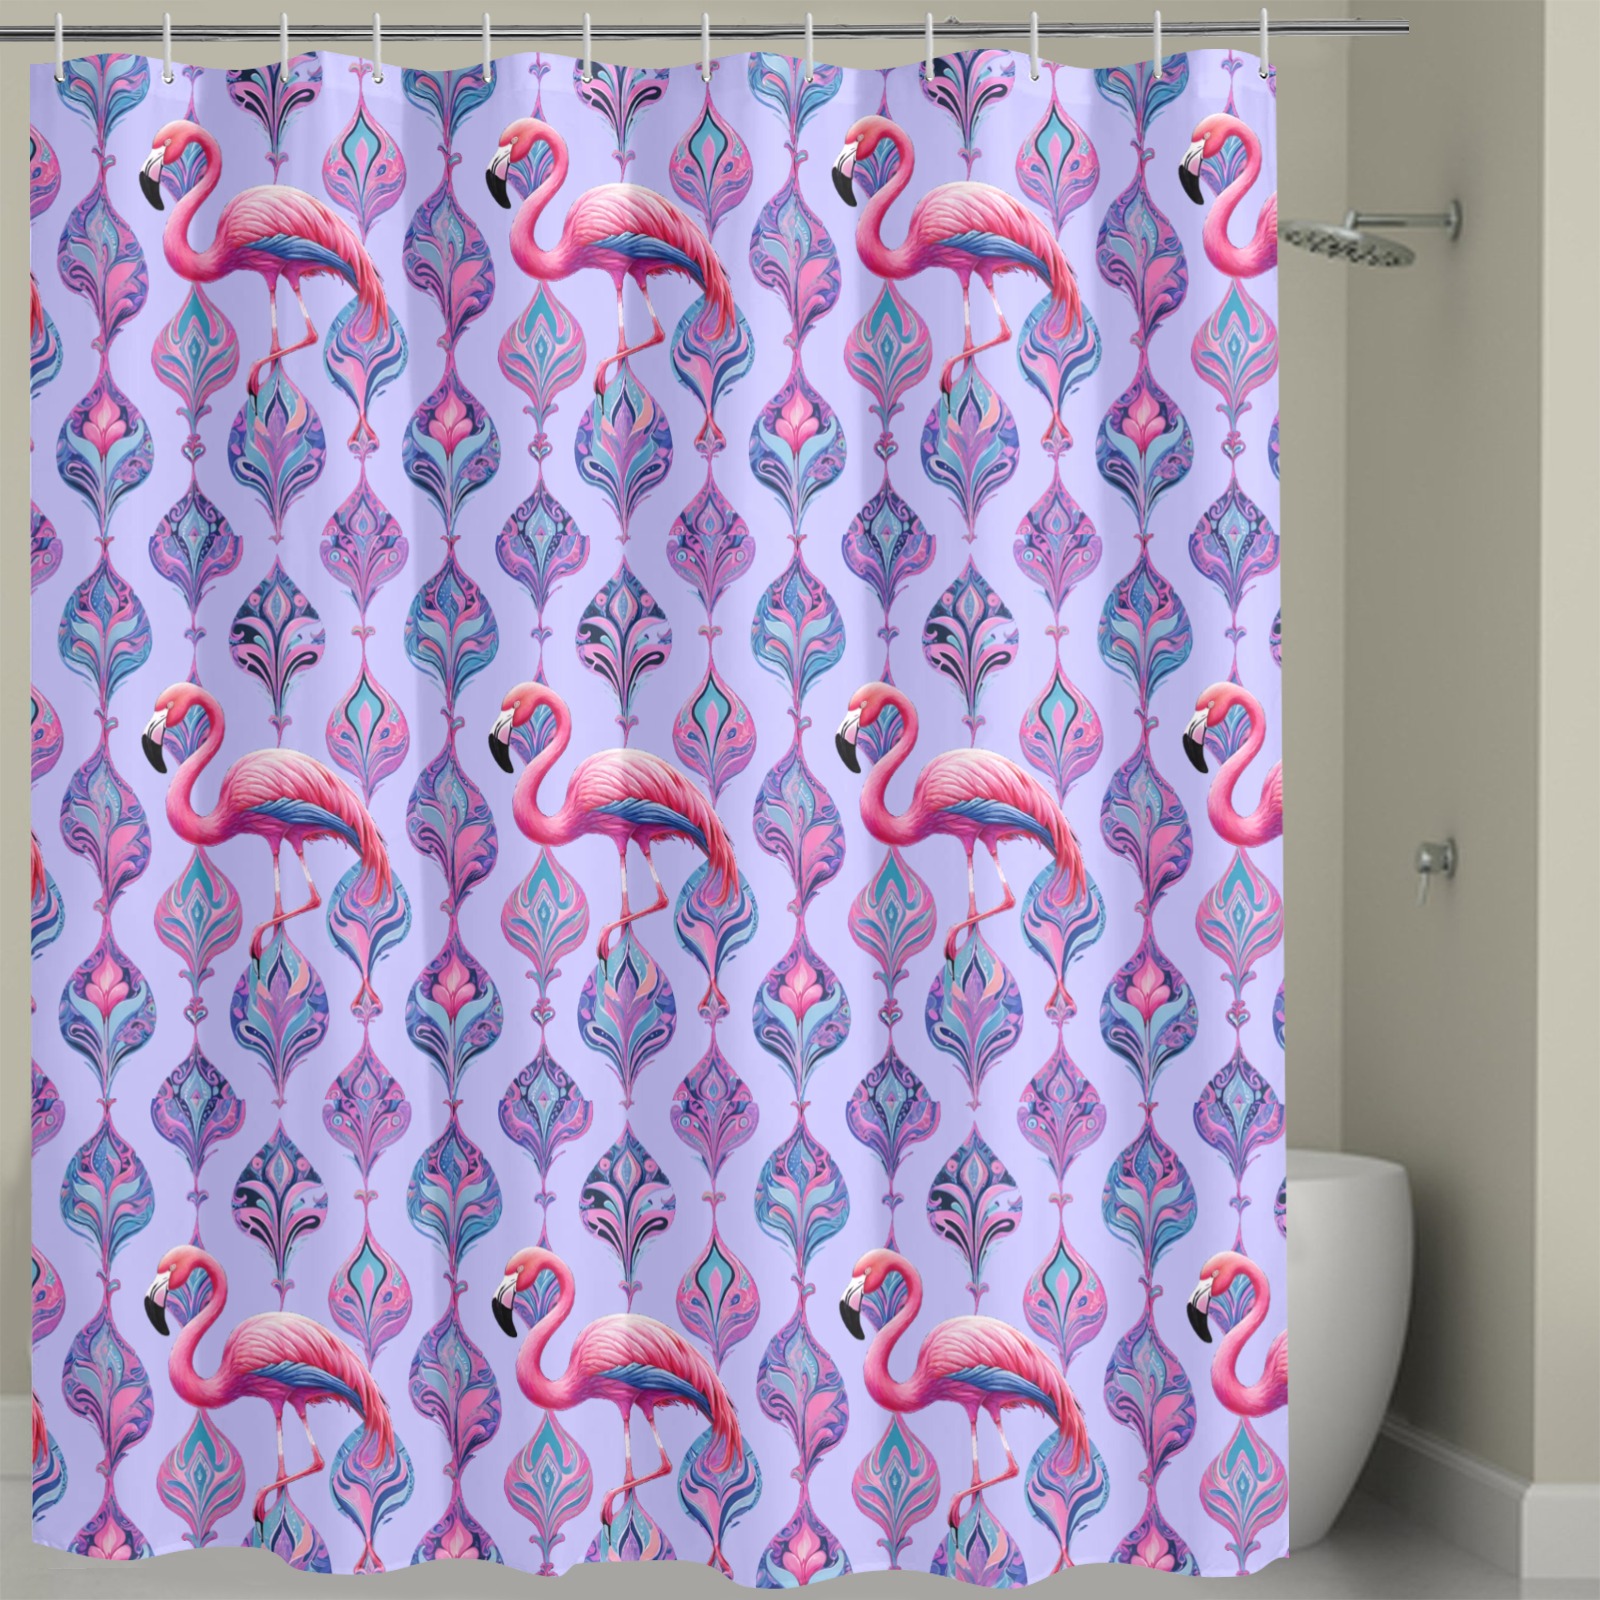 Flamingos Paisley Pattern Pastel Pink and Blue Shower Curtain 72" x 72"